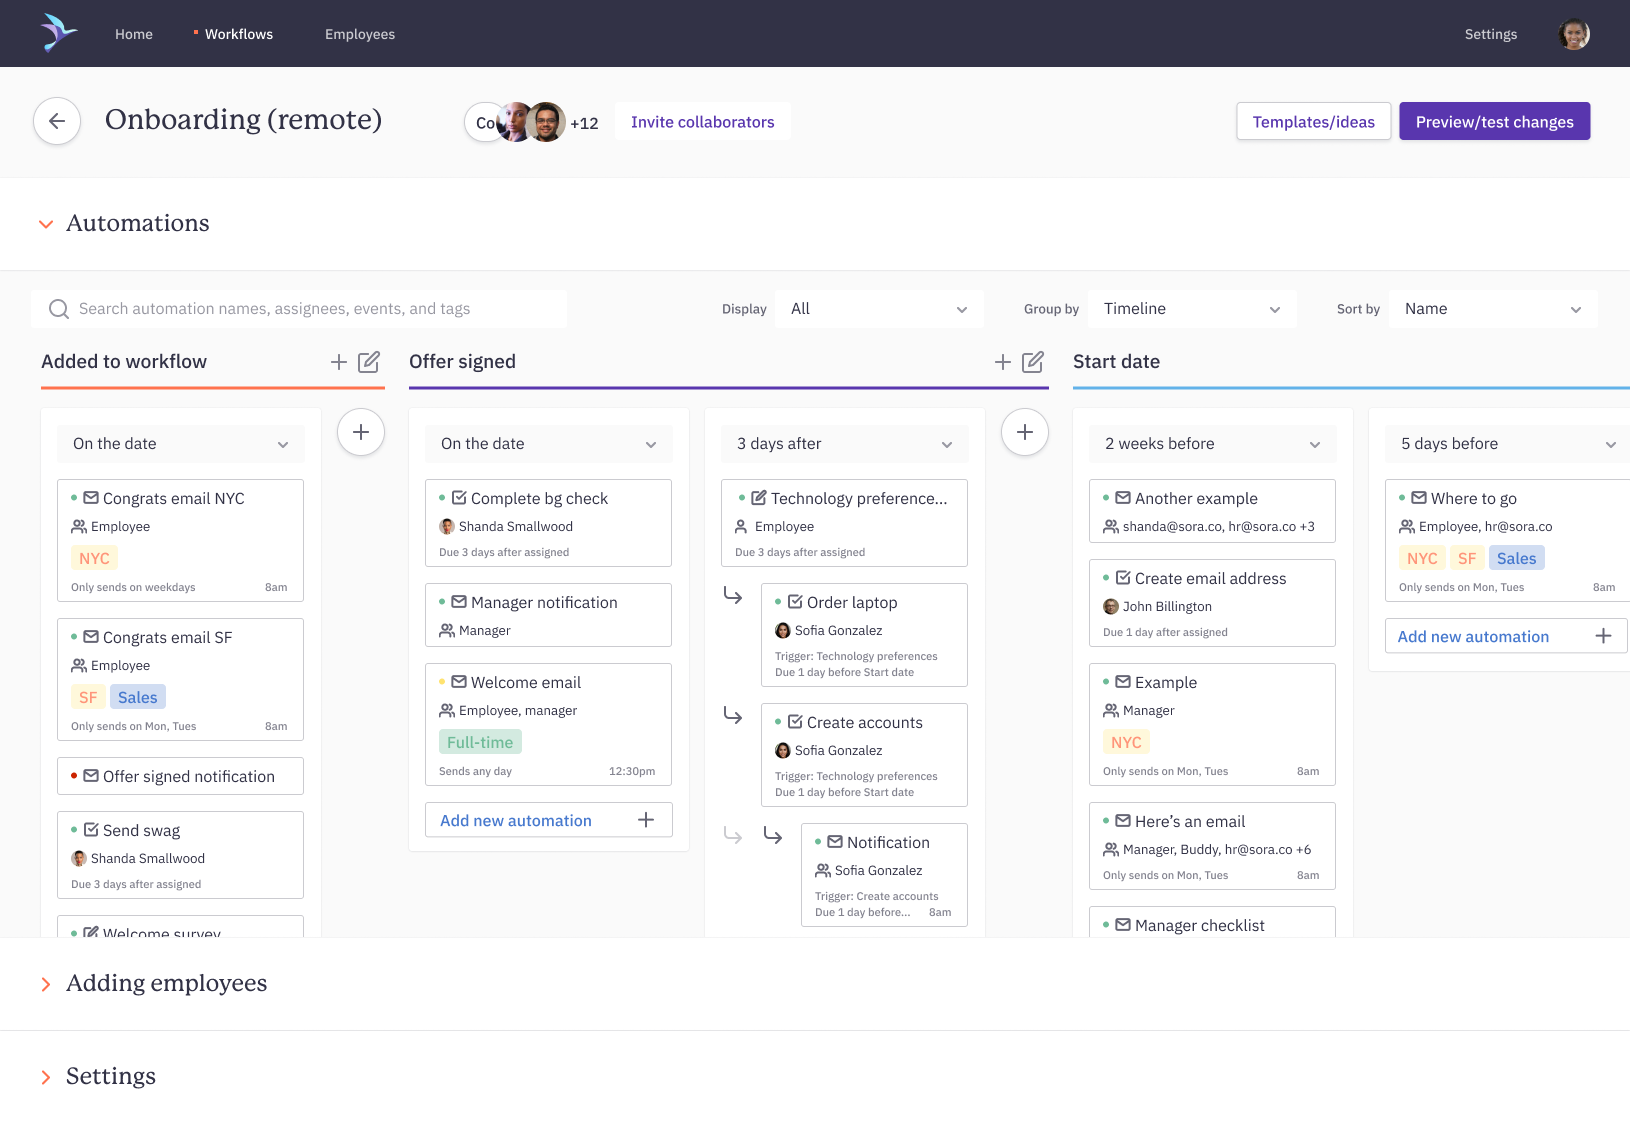 Build workflows for onboarding, offboarding, and everything in-between